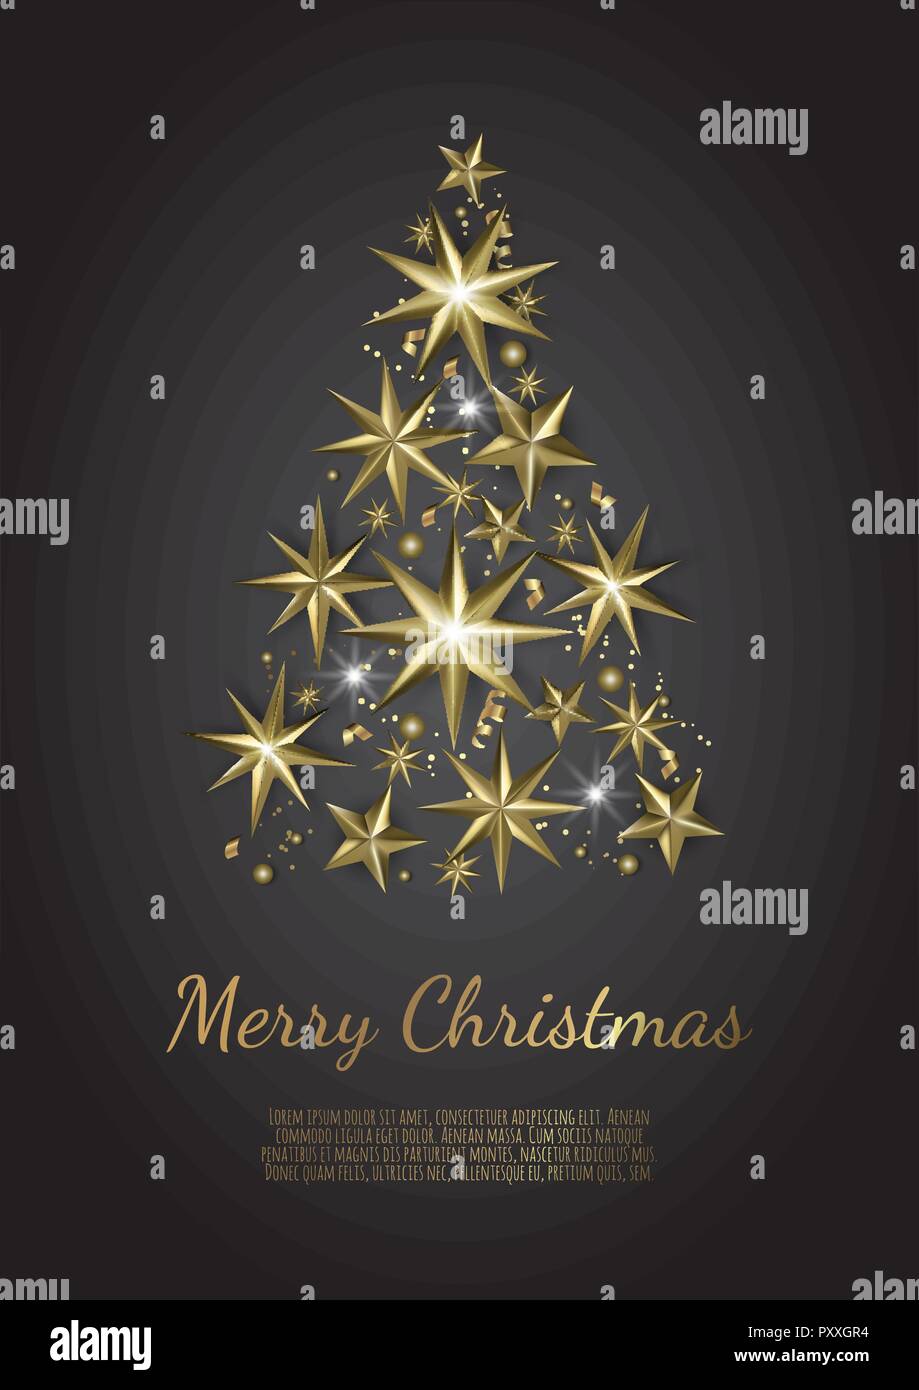 Christmas Tree made of Gold Foil Stars on black Background. Christmas Greeting Card Stock Vector